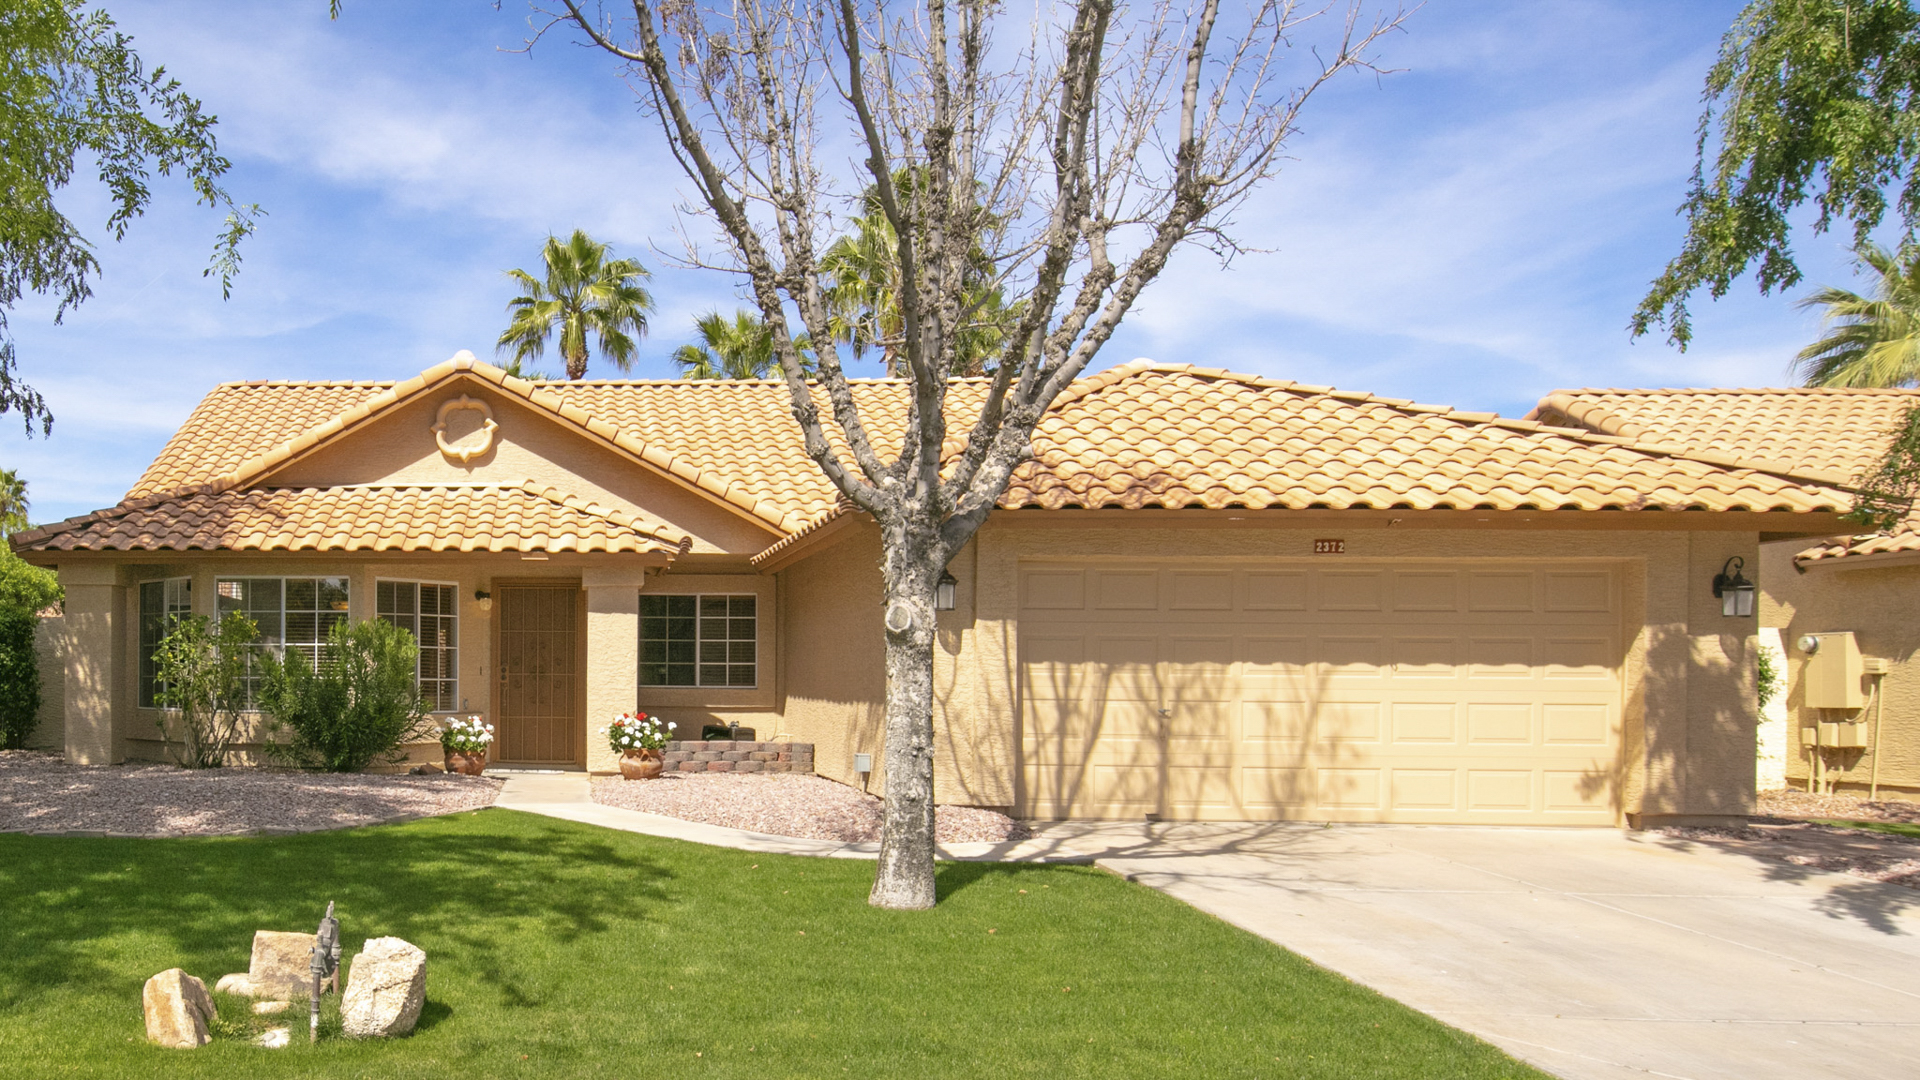 Under Contract! 2372 W Redwood Dr. Chandler, AZ 85248  - Waters Edge at Ocotillo | Amy Jones Group